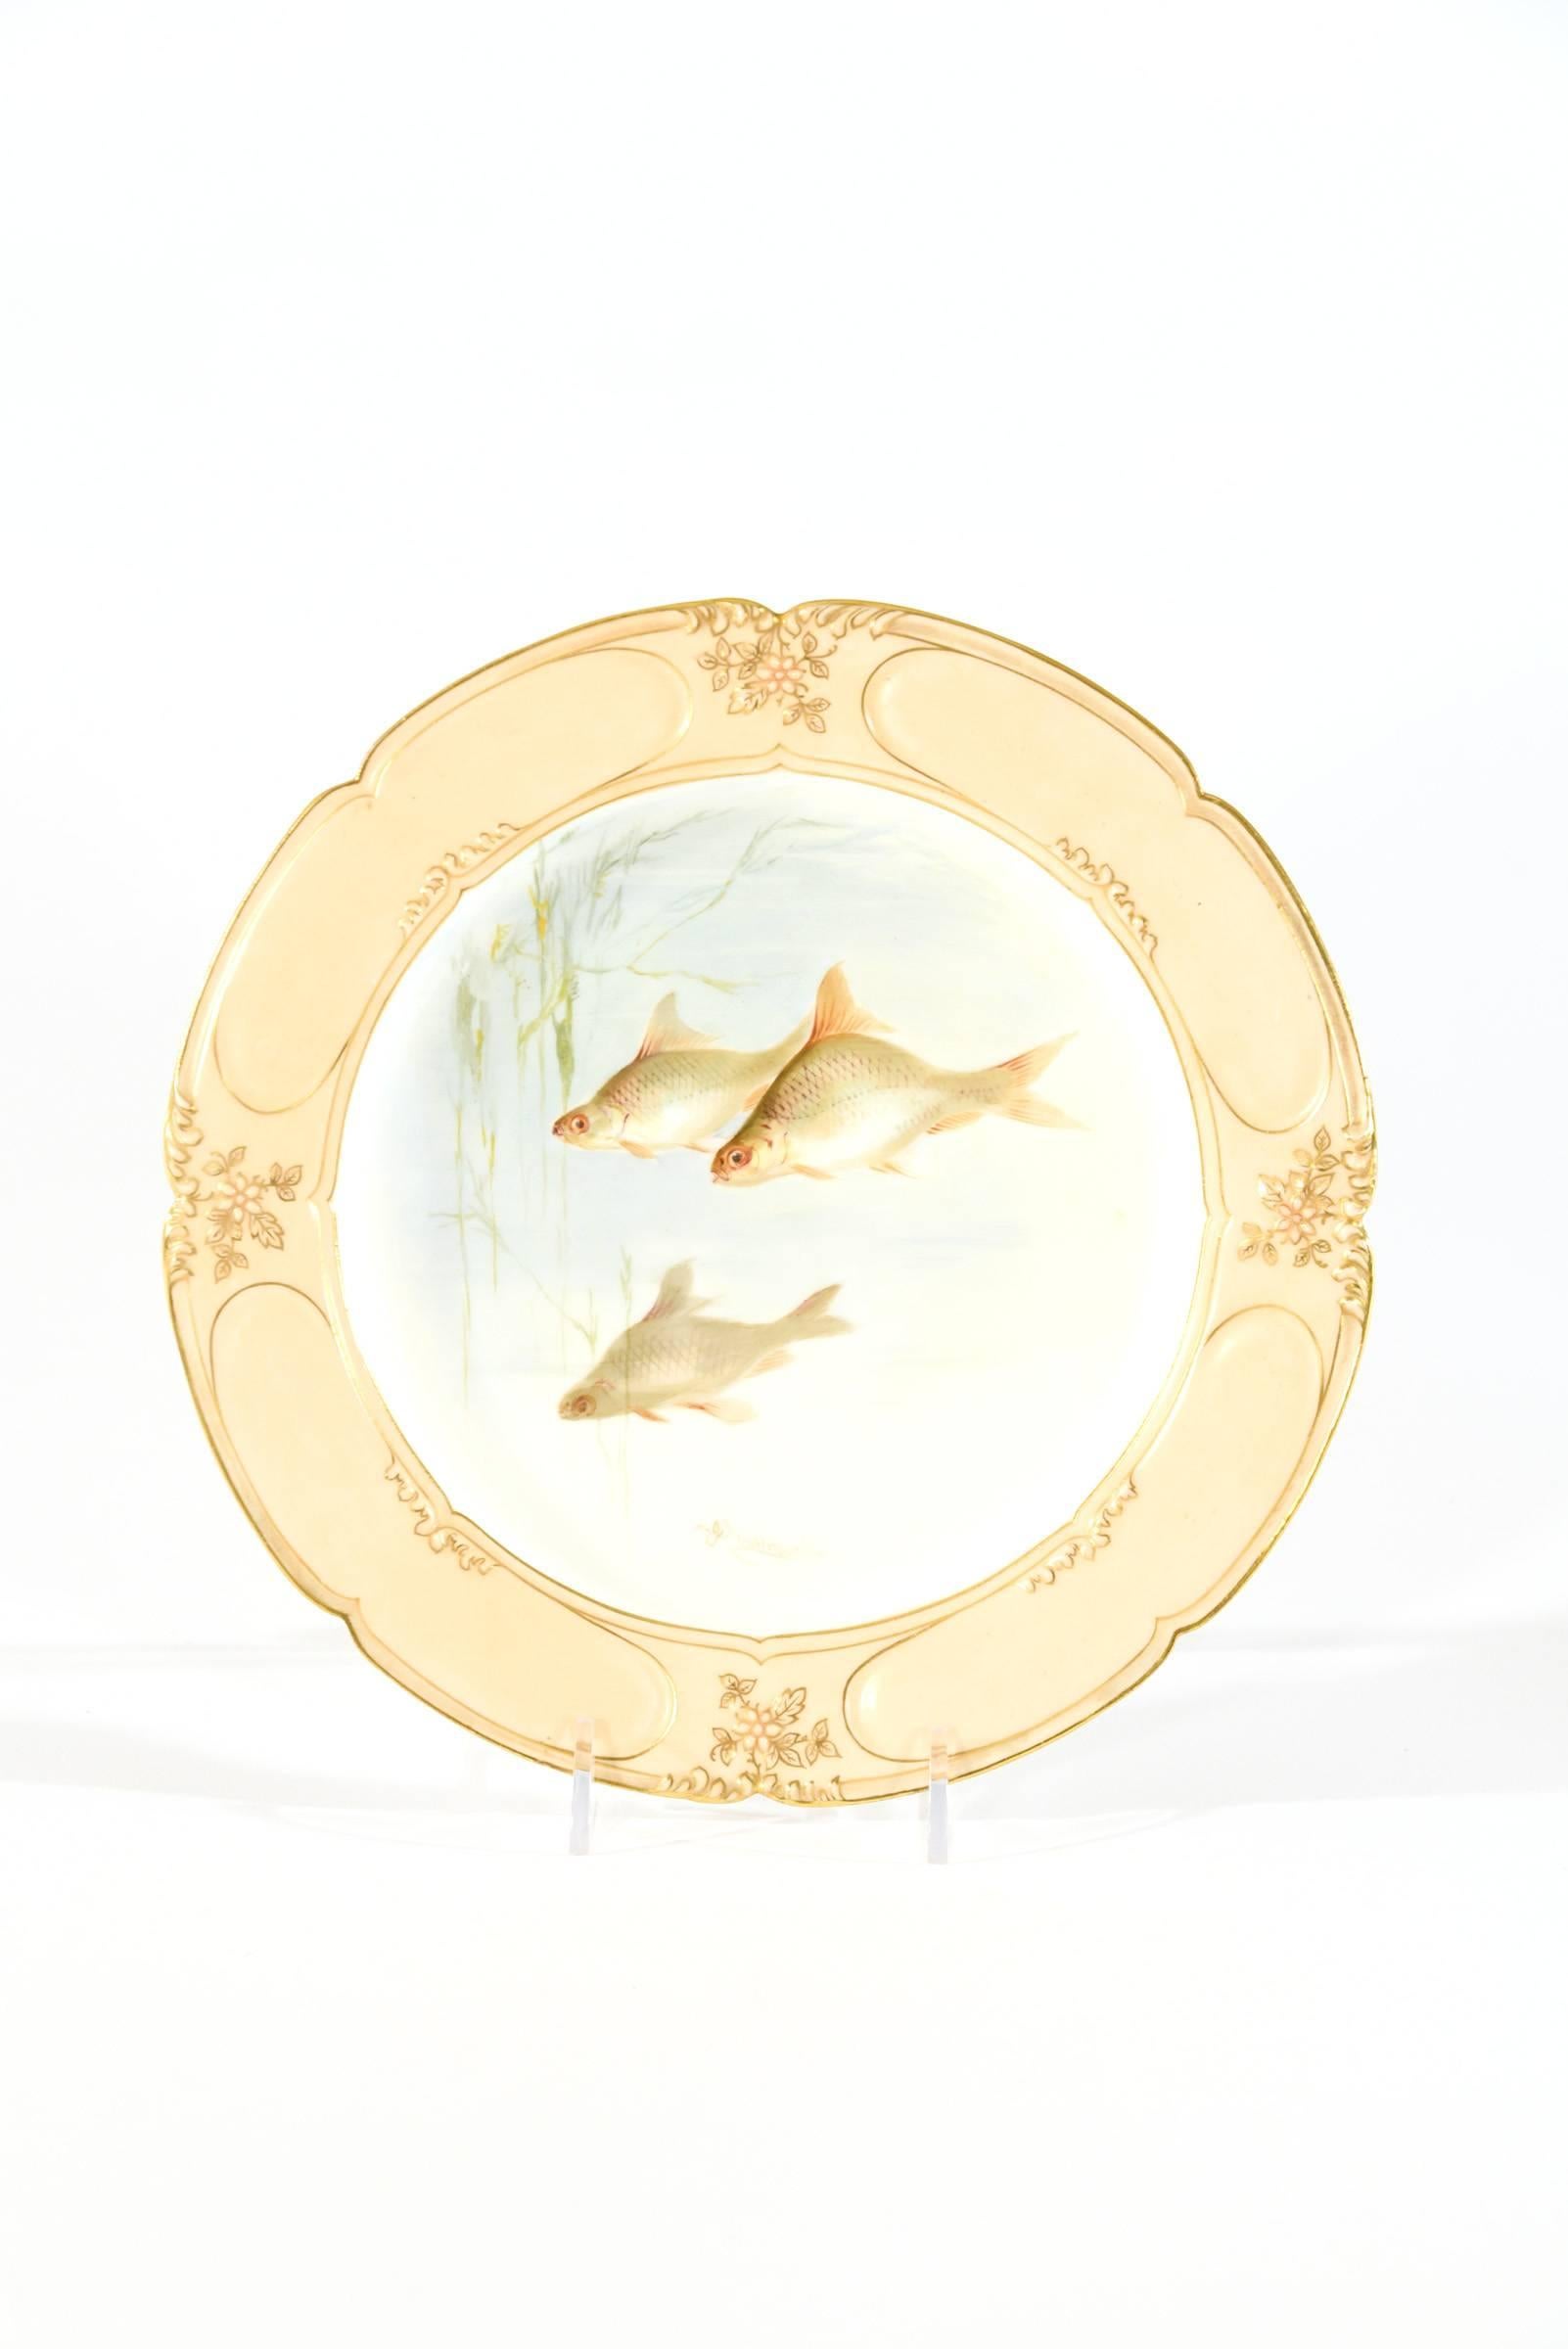 Set of 12 Doulton Burslem Hand-Painted Artist Signed Fish Plates, 19th Century In Excellent Condition For Sale In Great Barrington, MA